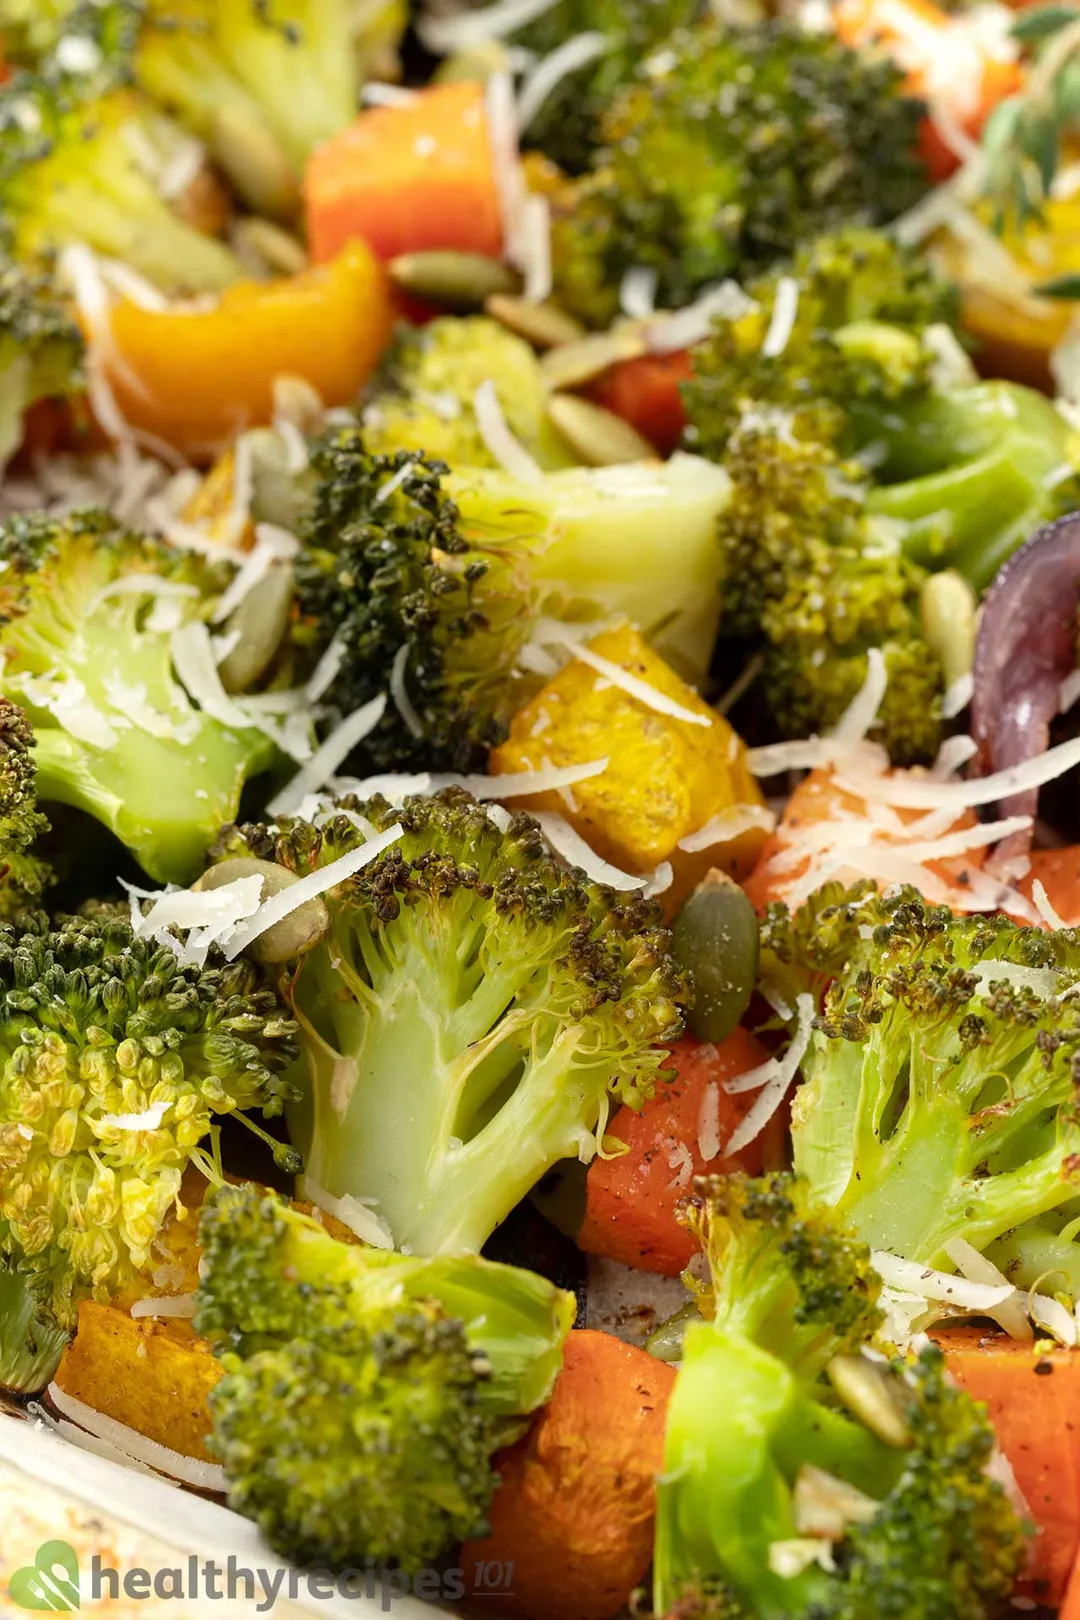 A close-up shot of roasted broccoli, squash cubes, and shredded cheese.